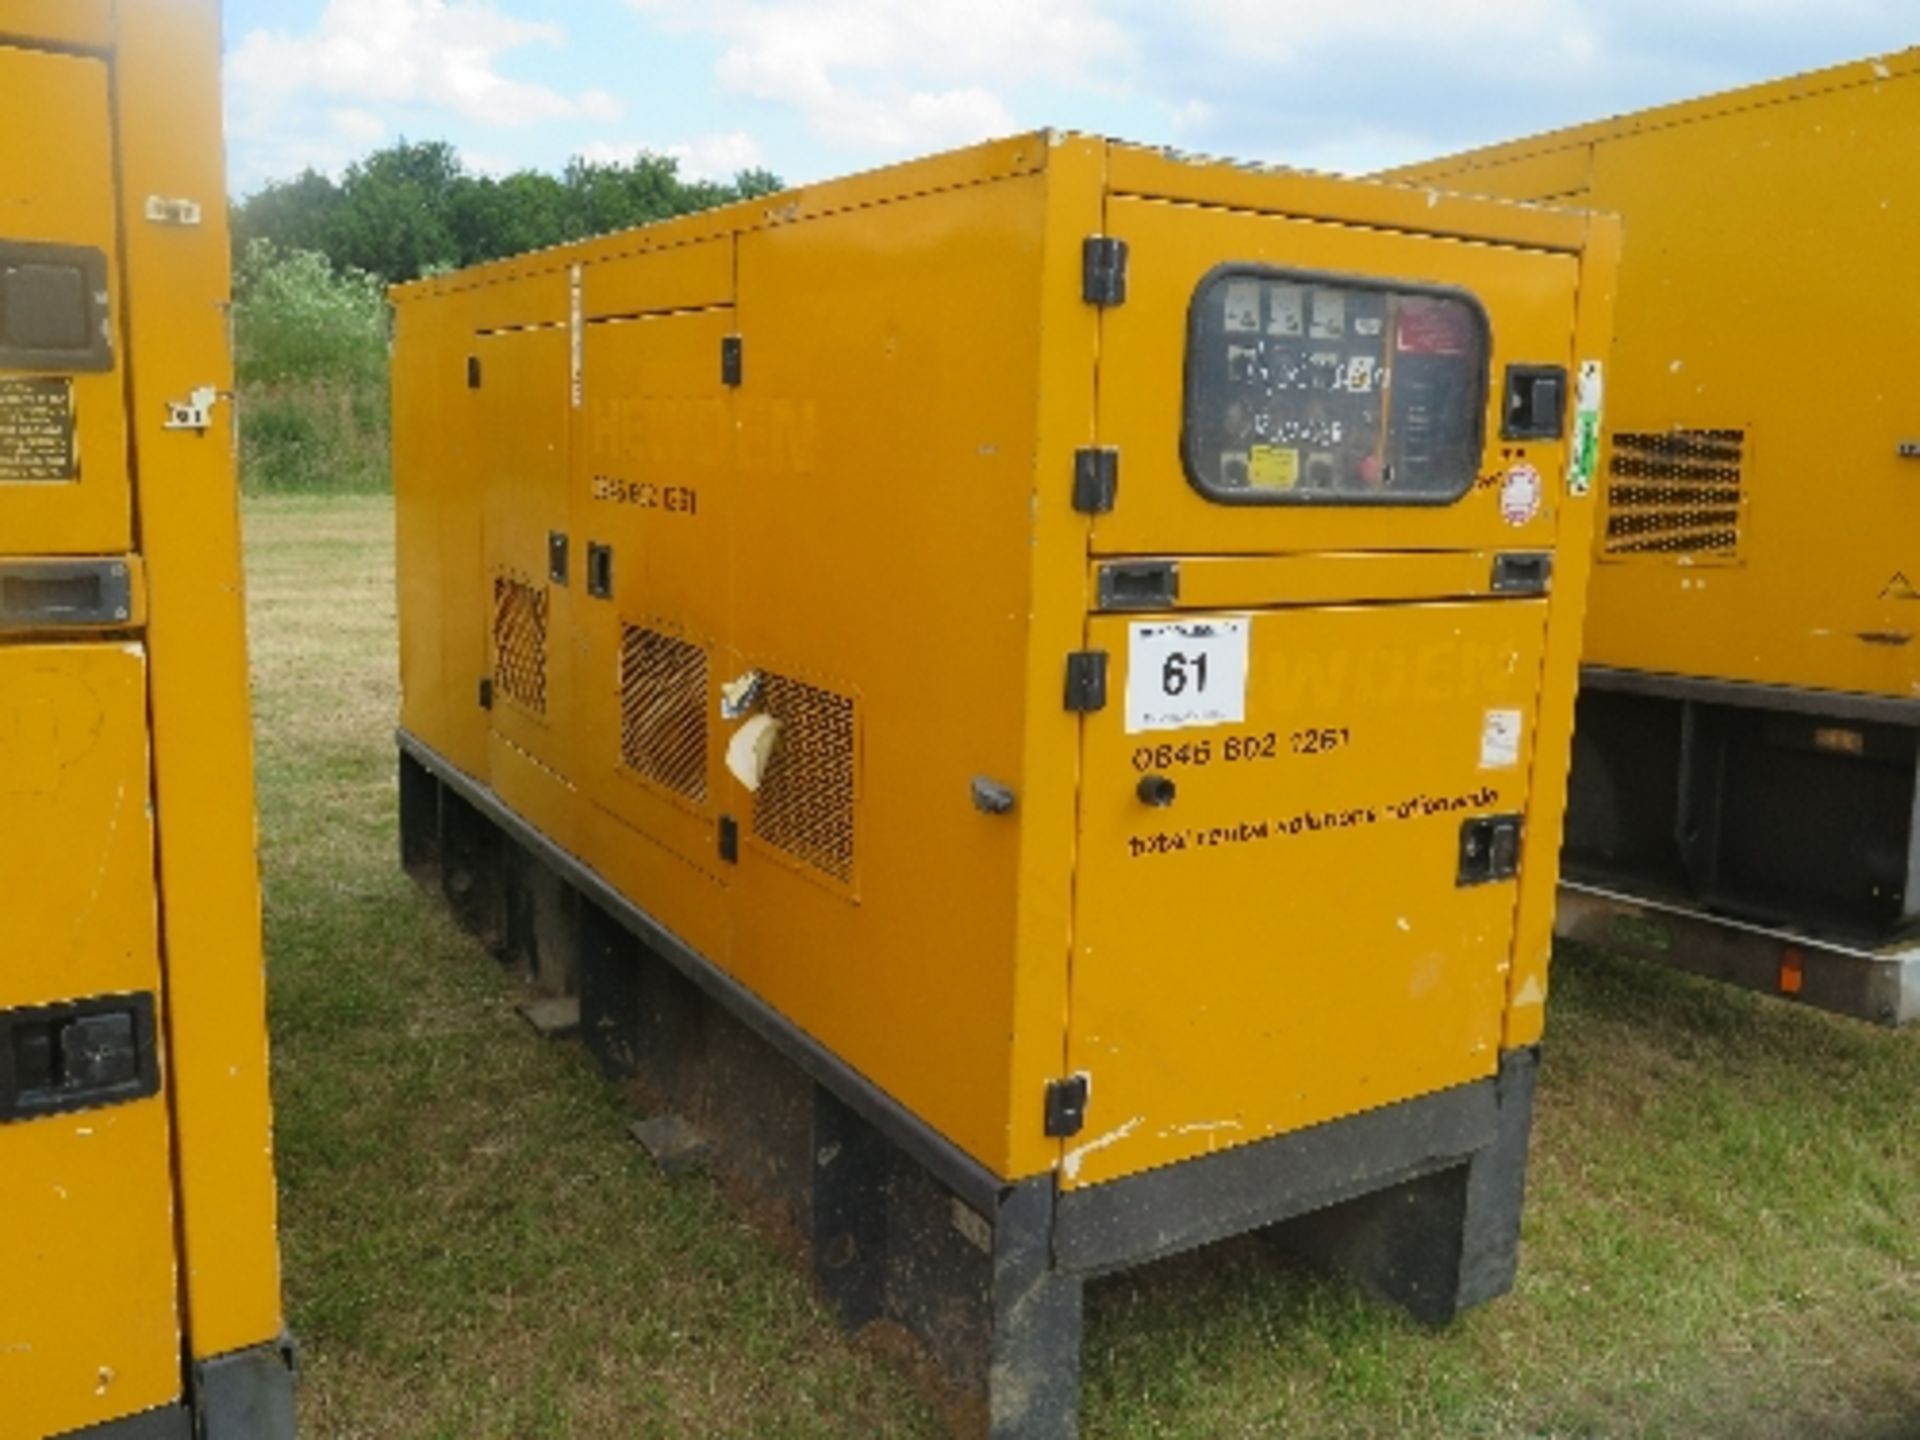 Caterpillar XQE100 generator 18121 hrs 138848
PERKINS - RUNS AND MAKES POWER
ALL LOTS are SOLD